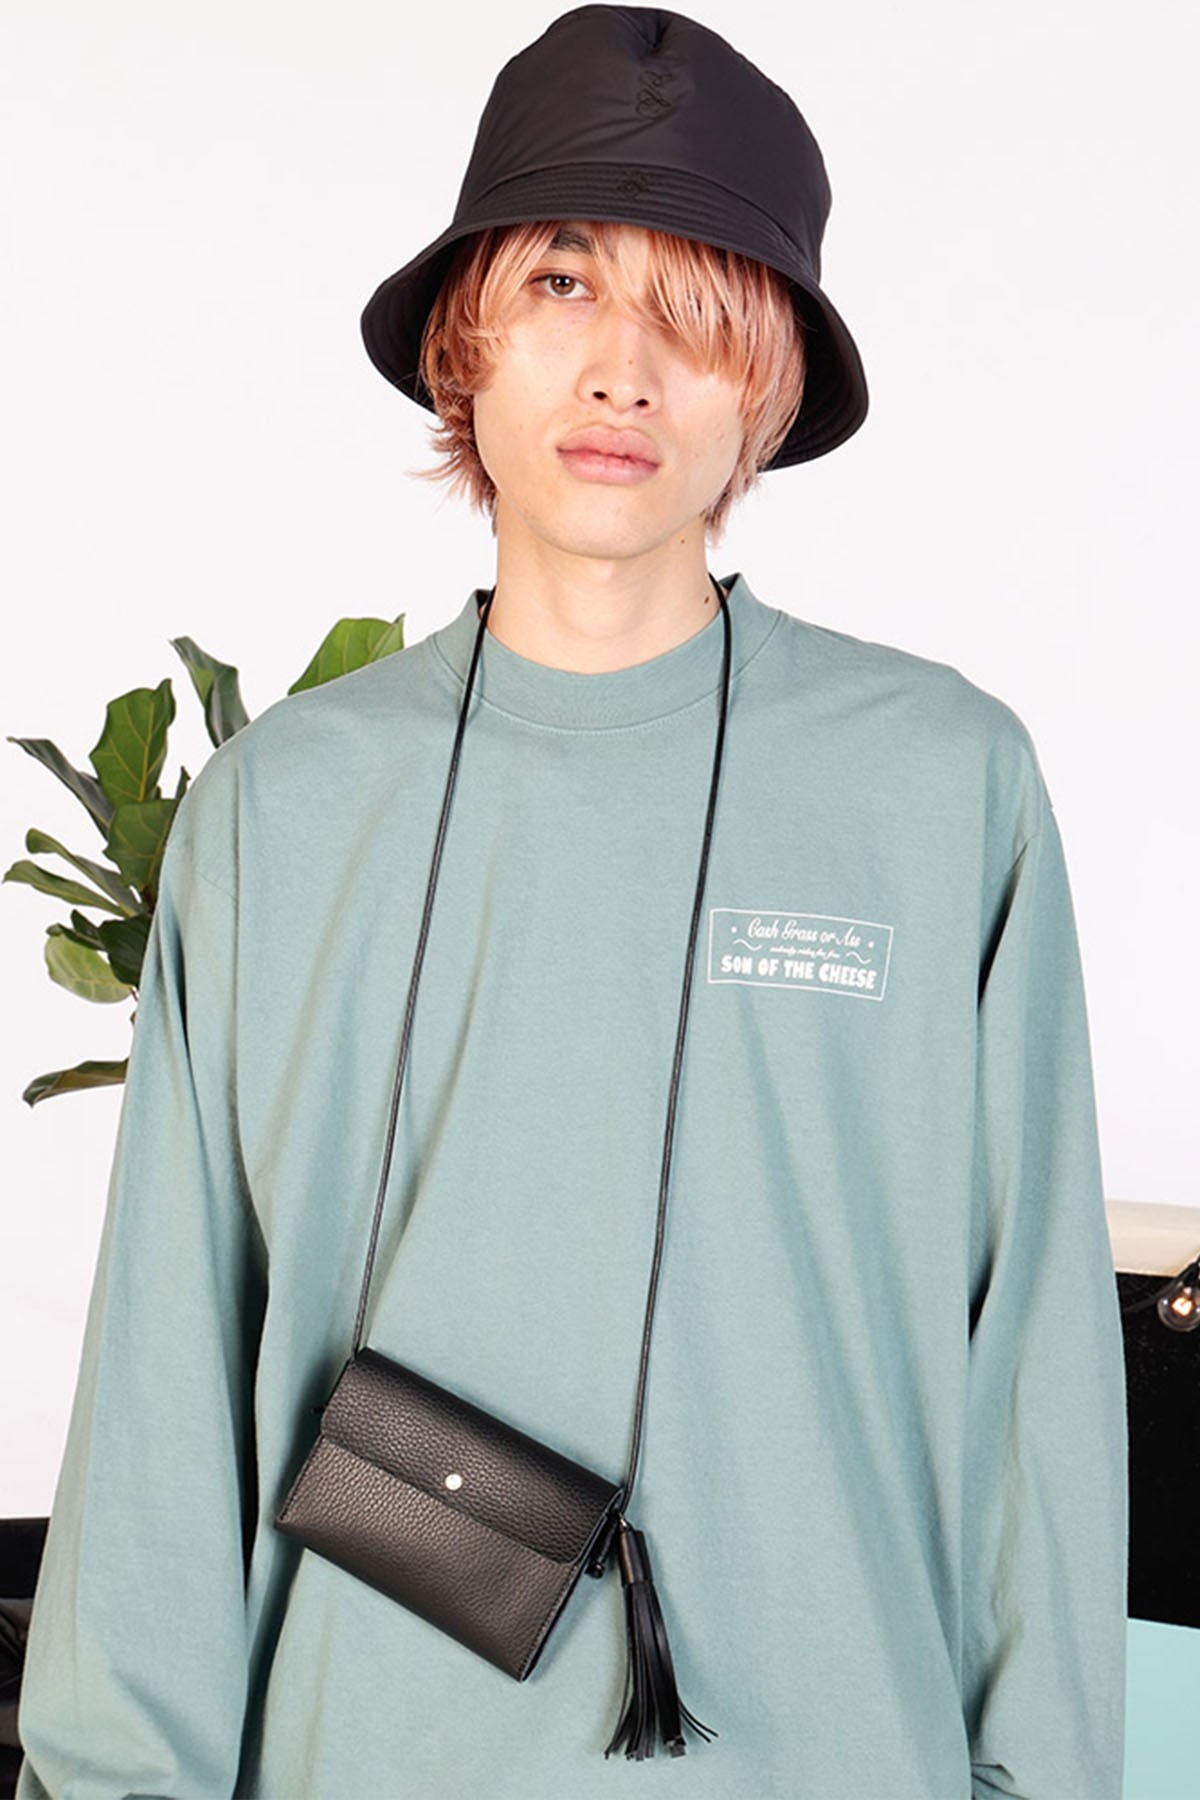 SON OF THE CHEESE 正式發佈 2022 秋冬系列「One Day」Lookbook